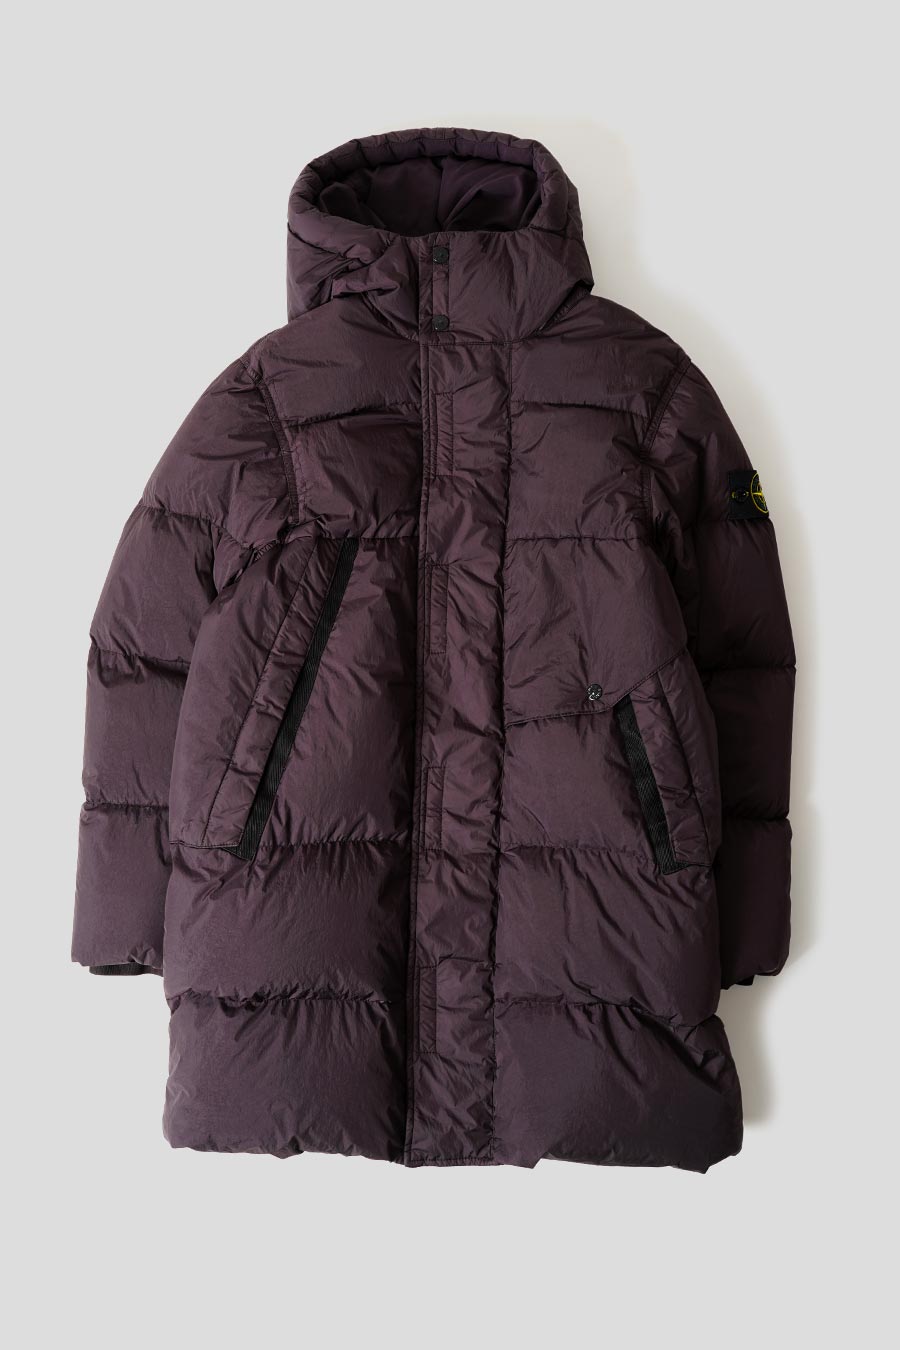 Stone Island - PARKA GARMENT DYED CRINKLE REPS RECYCLED NYLON DOWN ROUGE VIGNE - LE LABO STORE